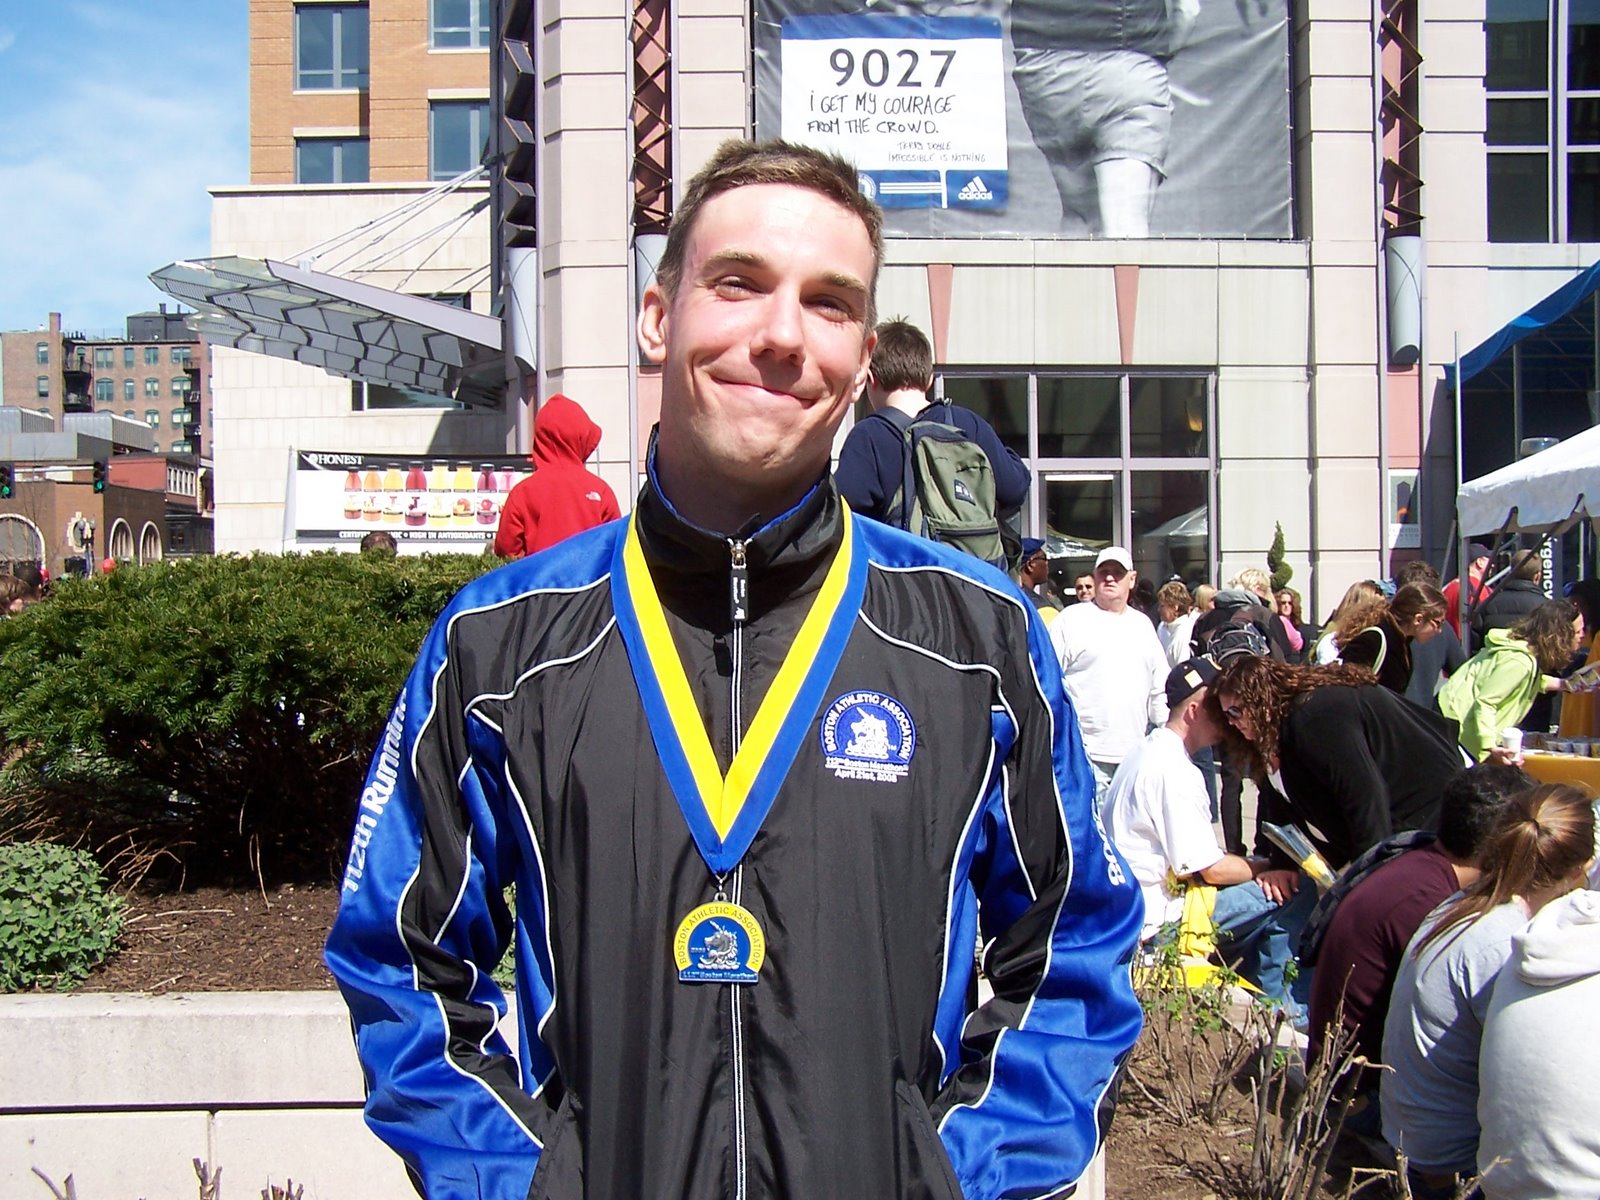 [post+race+with+jacket+and+medal.jpg]